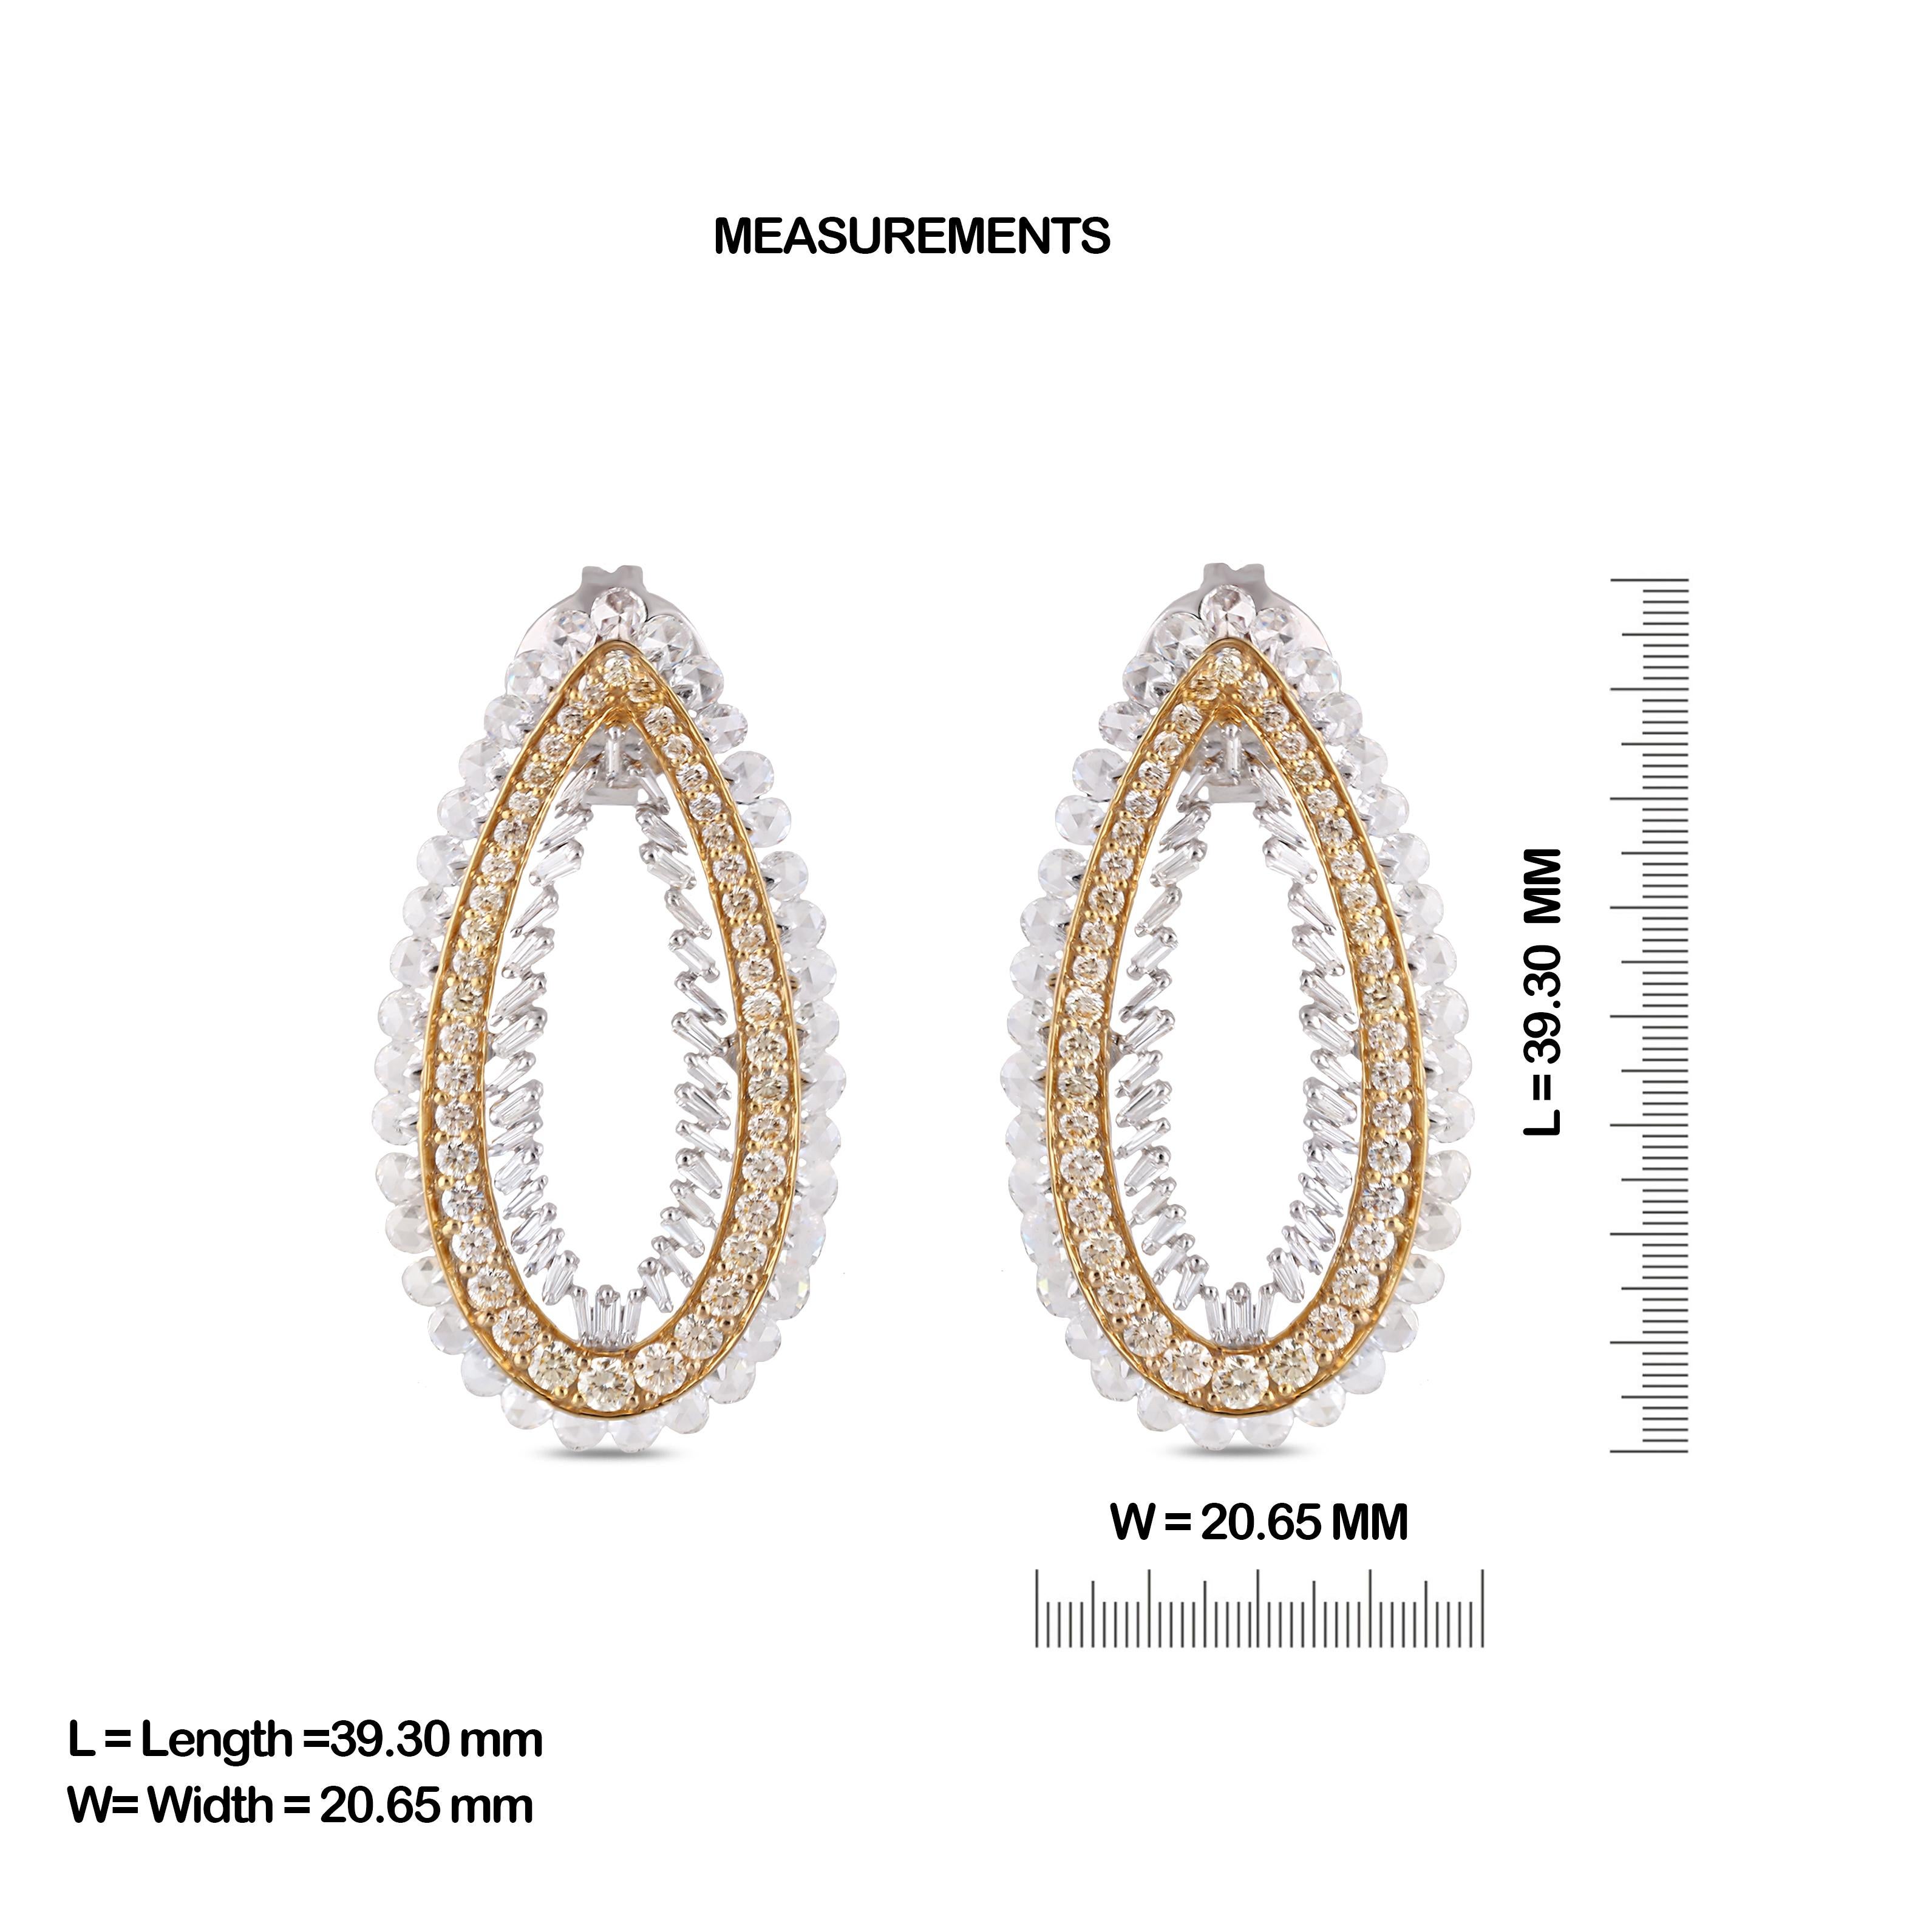 Gross Weight: 12.50 Grams
Diamond Weight: 5.14 cts
IGI Certification can be done on request.

Video of the product can be shared on request

Designed in a drop shape, fabricated in 18 karat white and yellow gold, featuring rosecut round on the